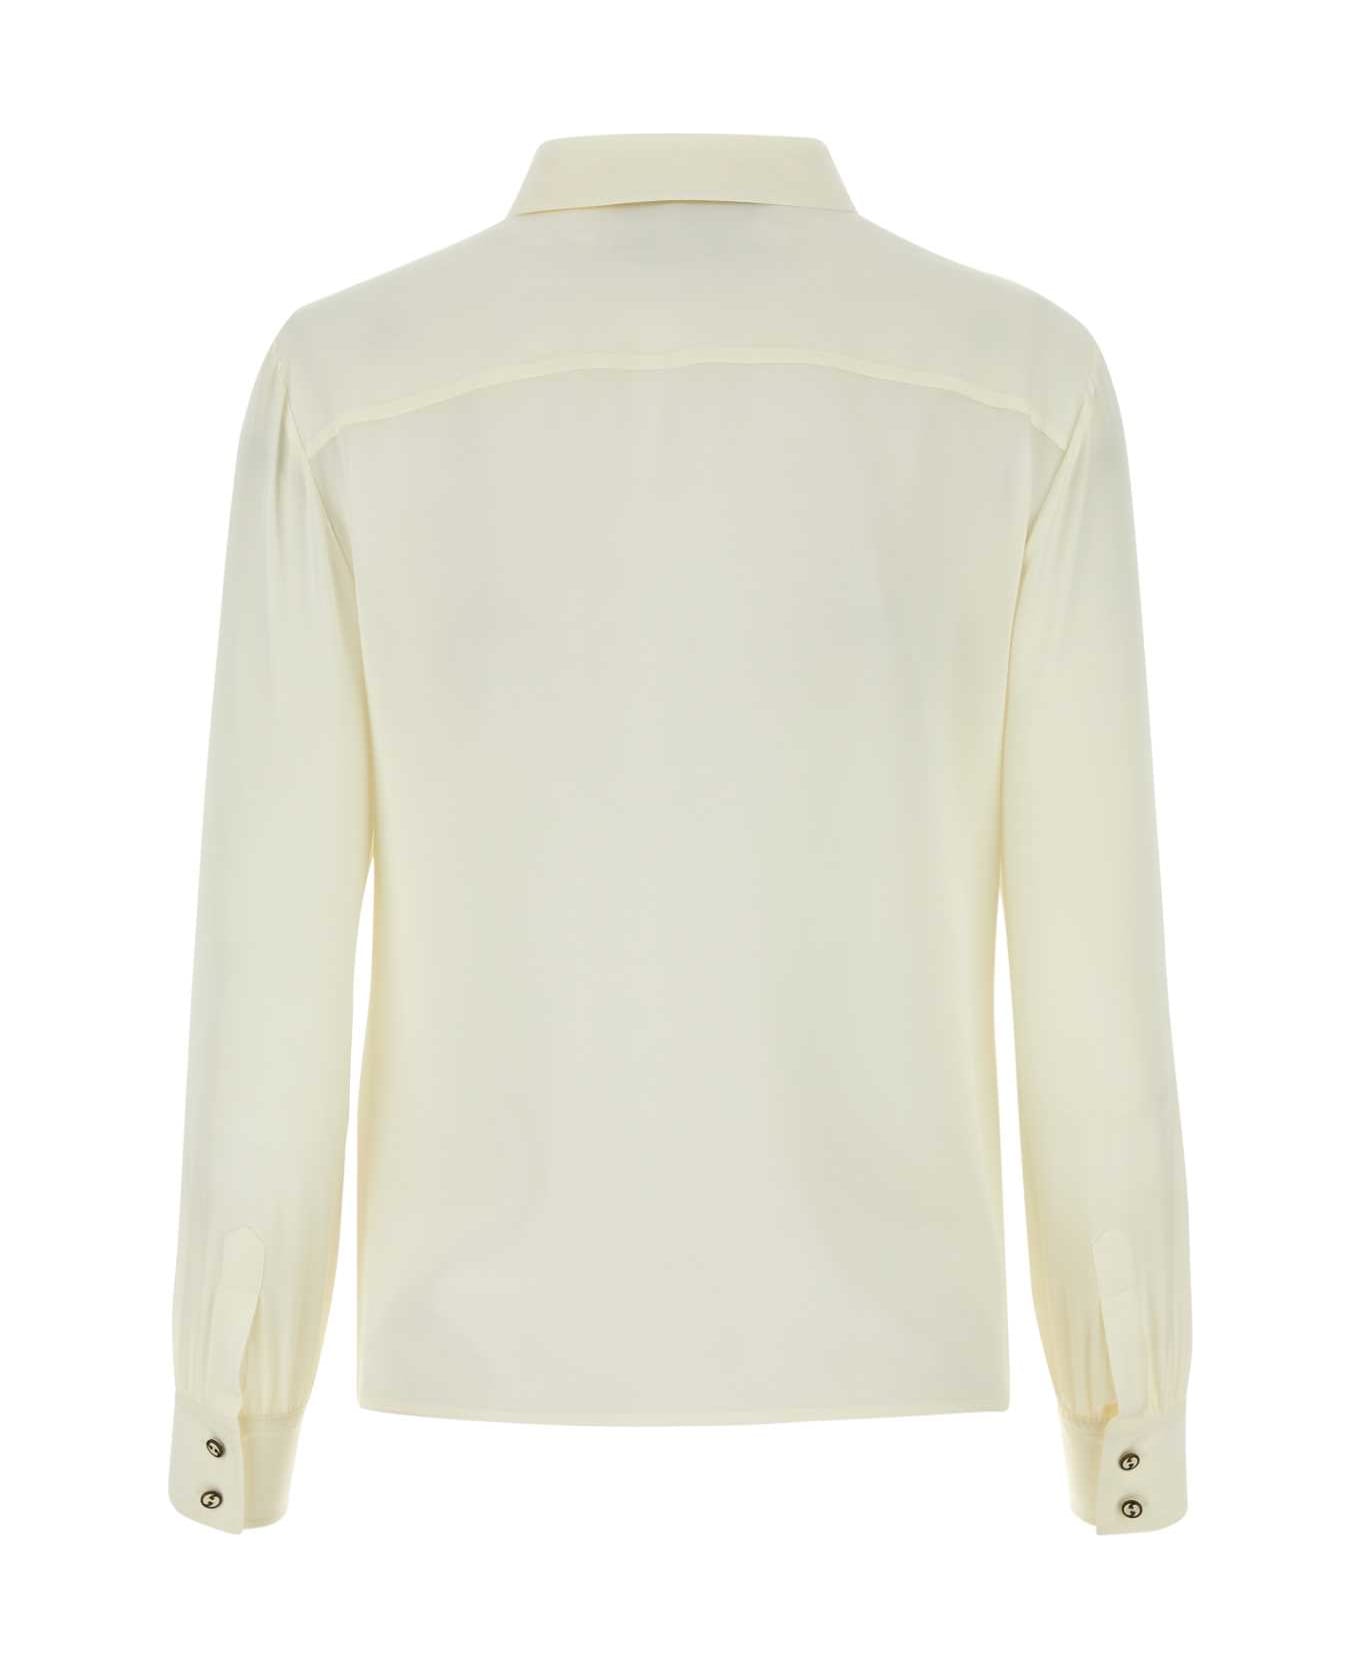 Gucci Ivory Crepe Shirt - IVOIRE シャツ